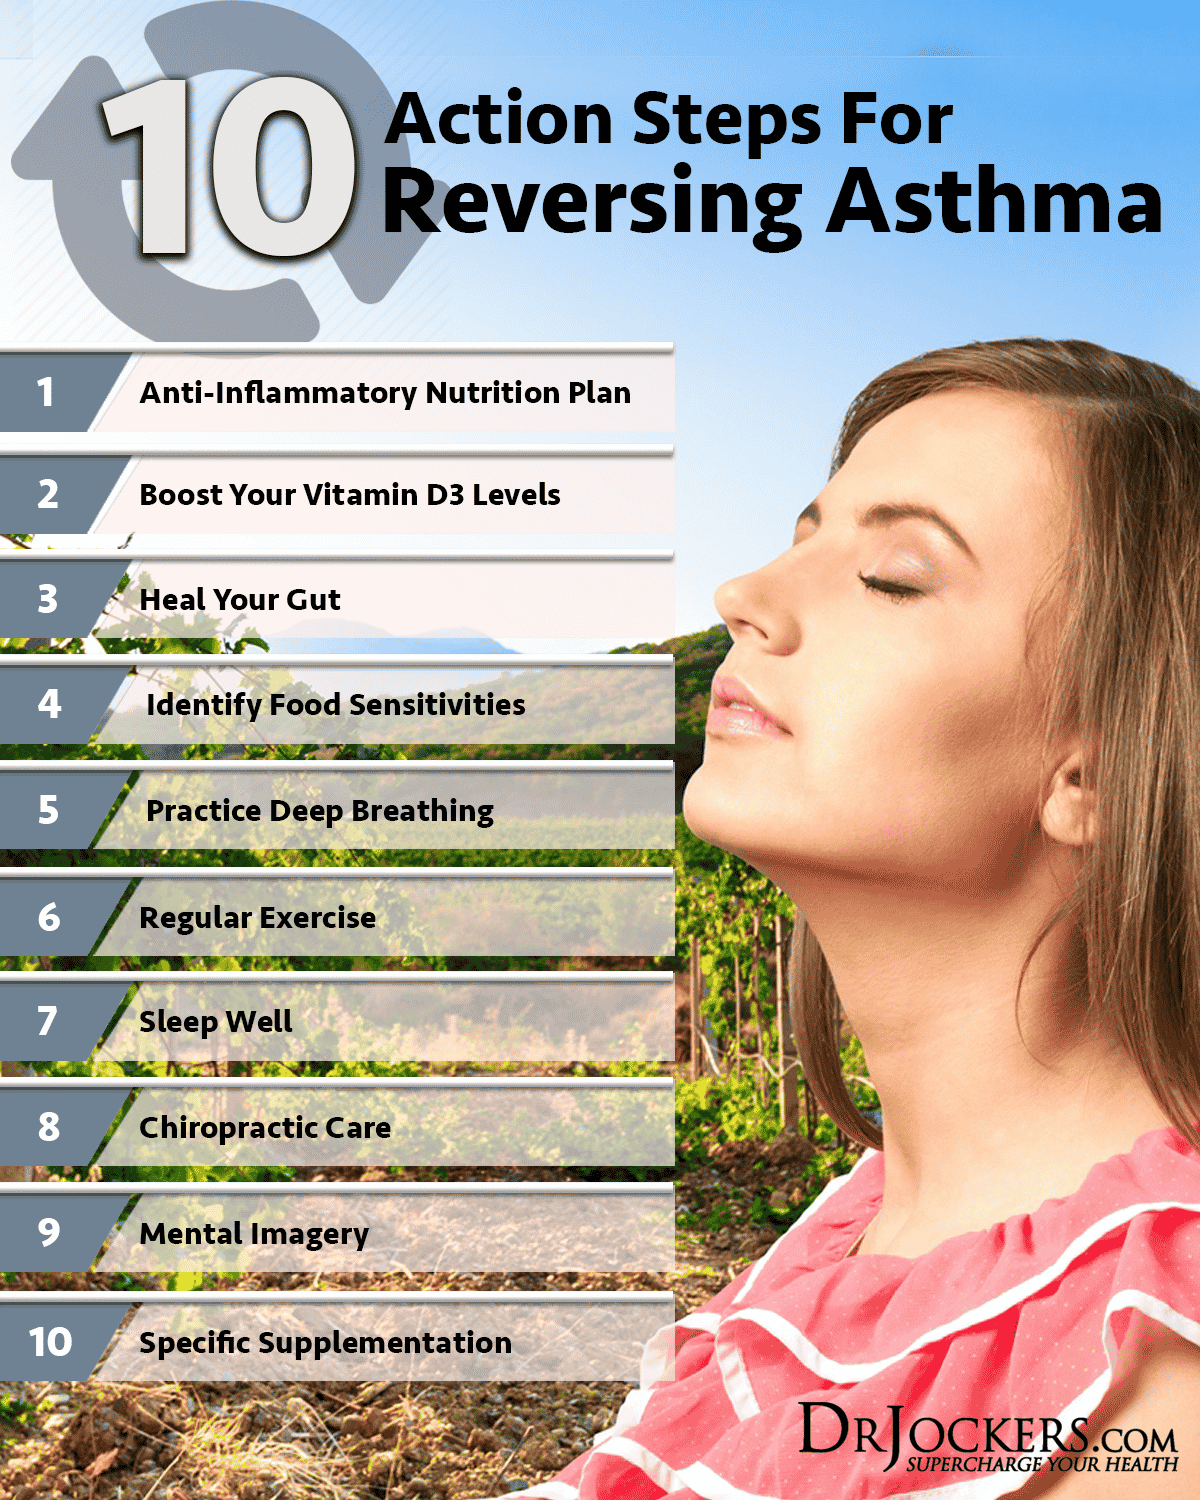 What Conditions Make Asthma Worse